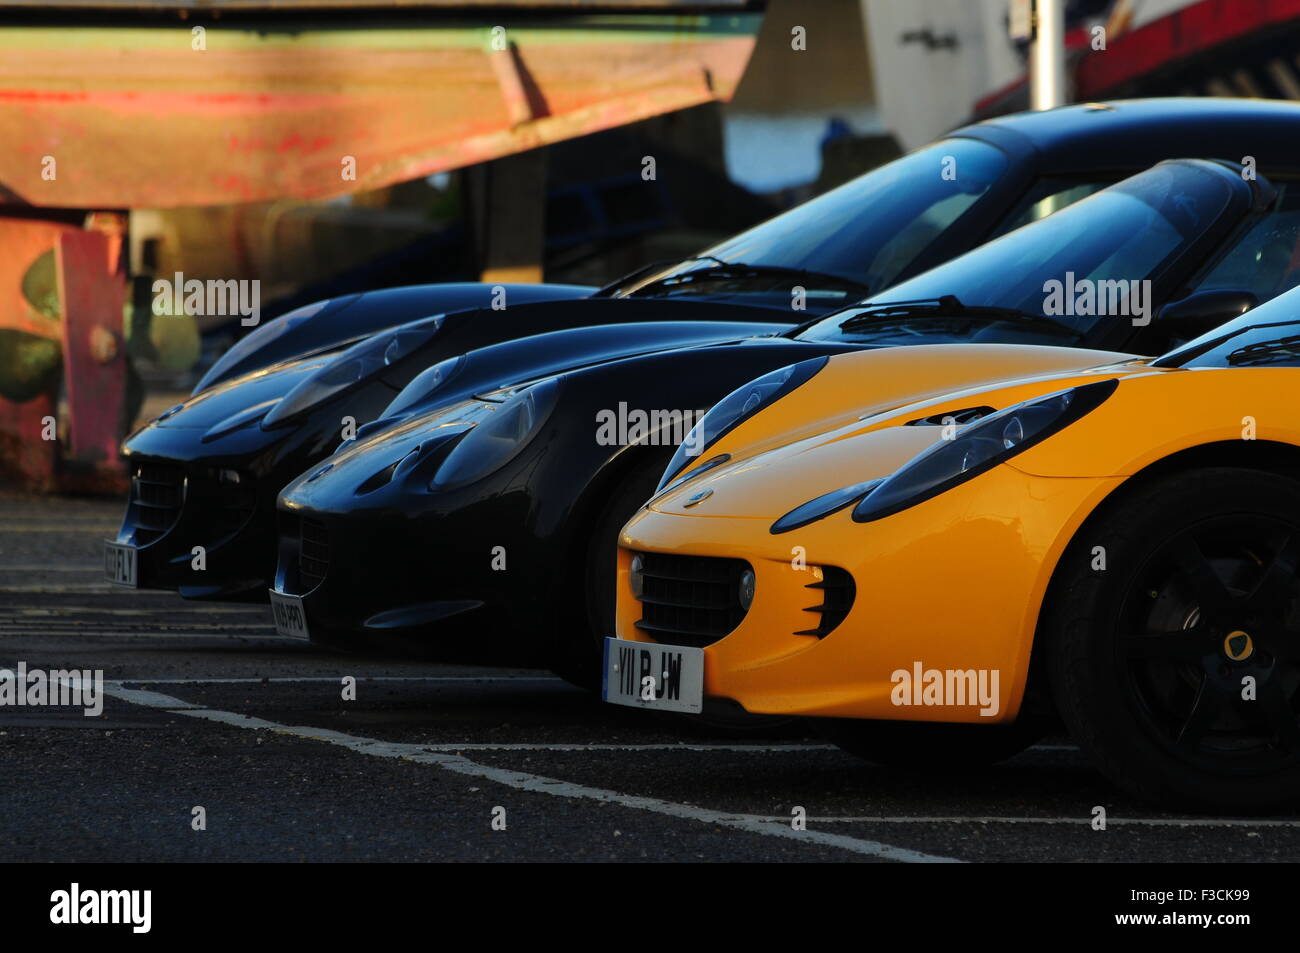 Three sports cars parked in a row UK Stock Photo